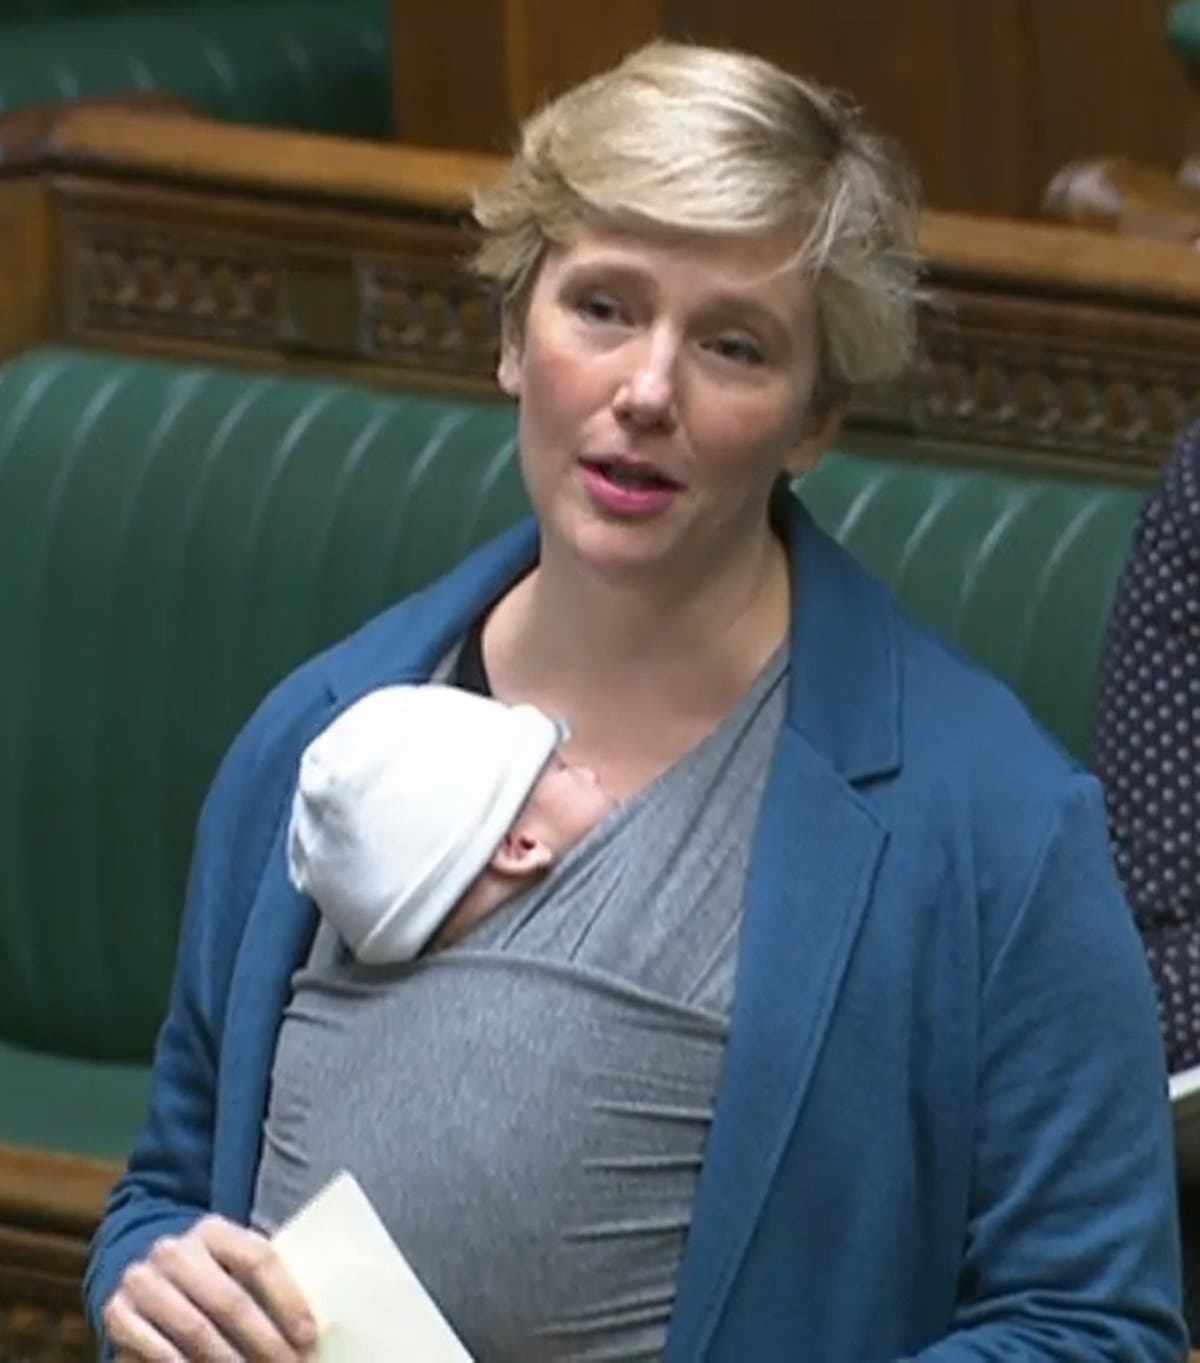 Stella Creasy’s shock as she is told no babies allowed in Commons